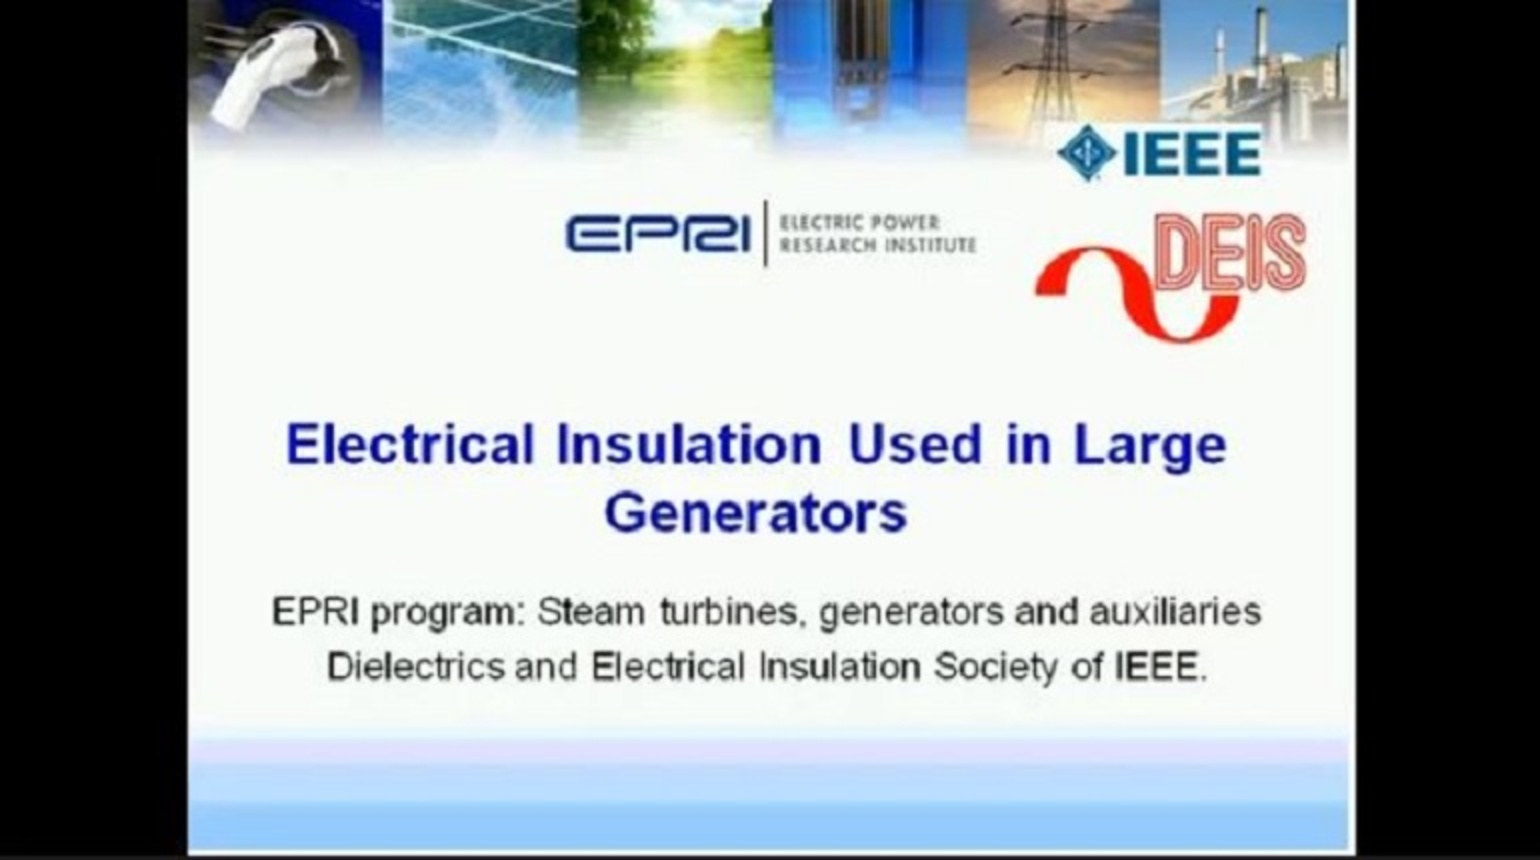 Electrical Insulation Used in Large Generators